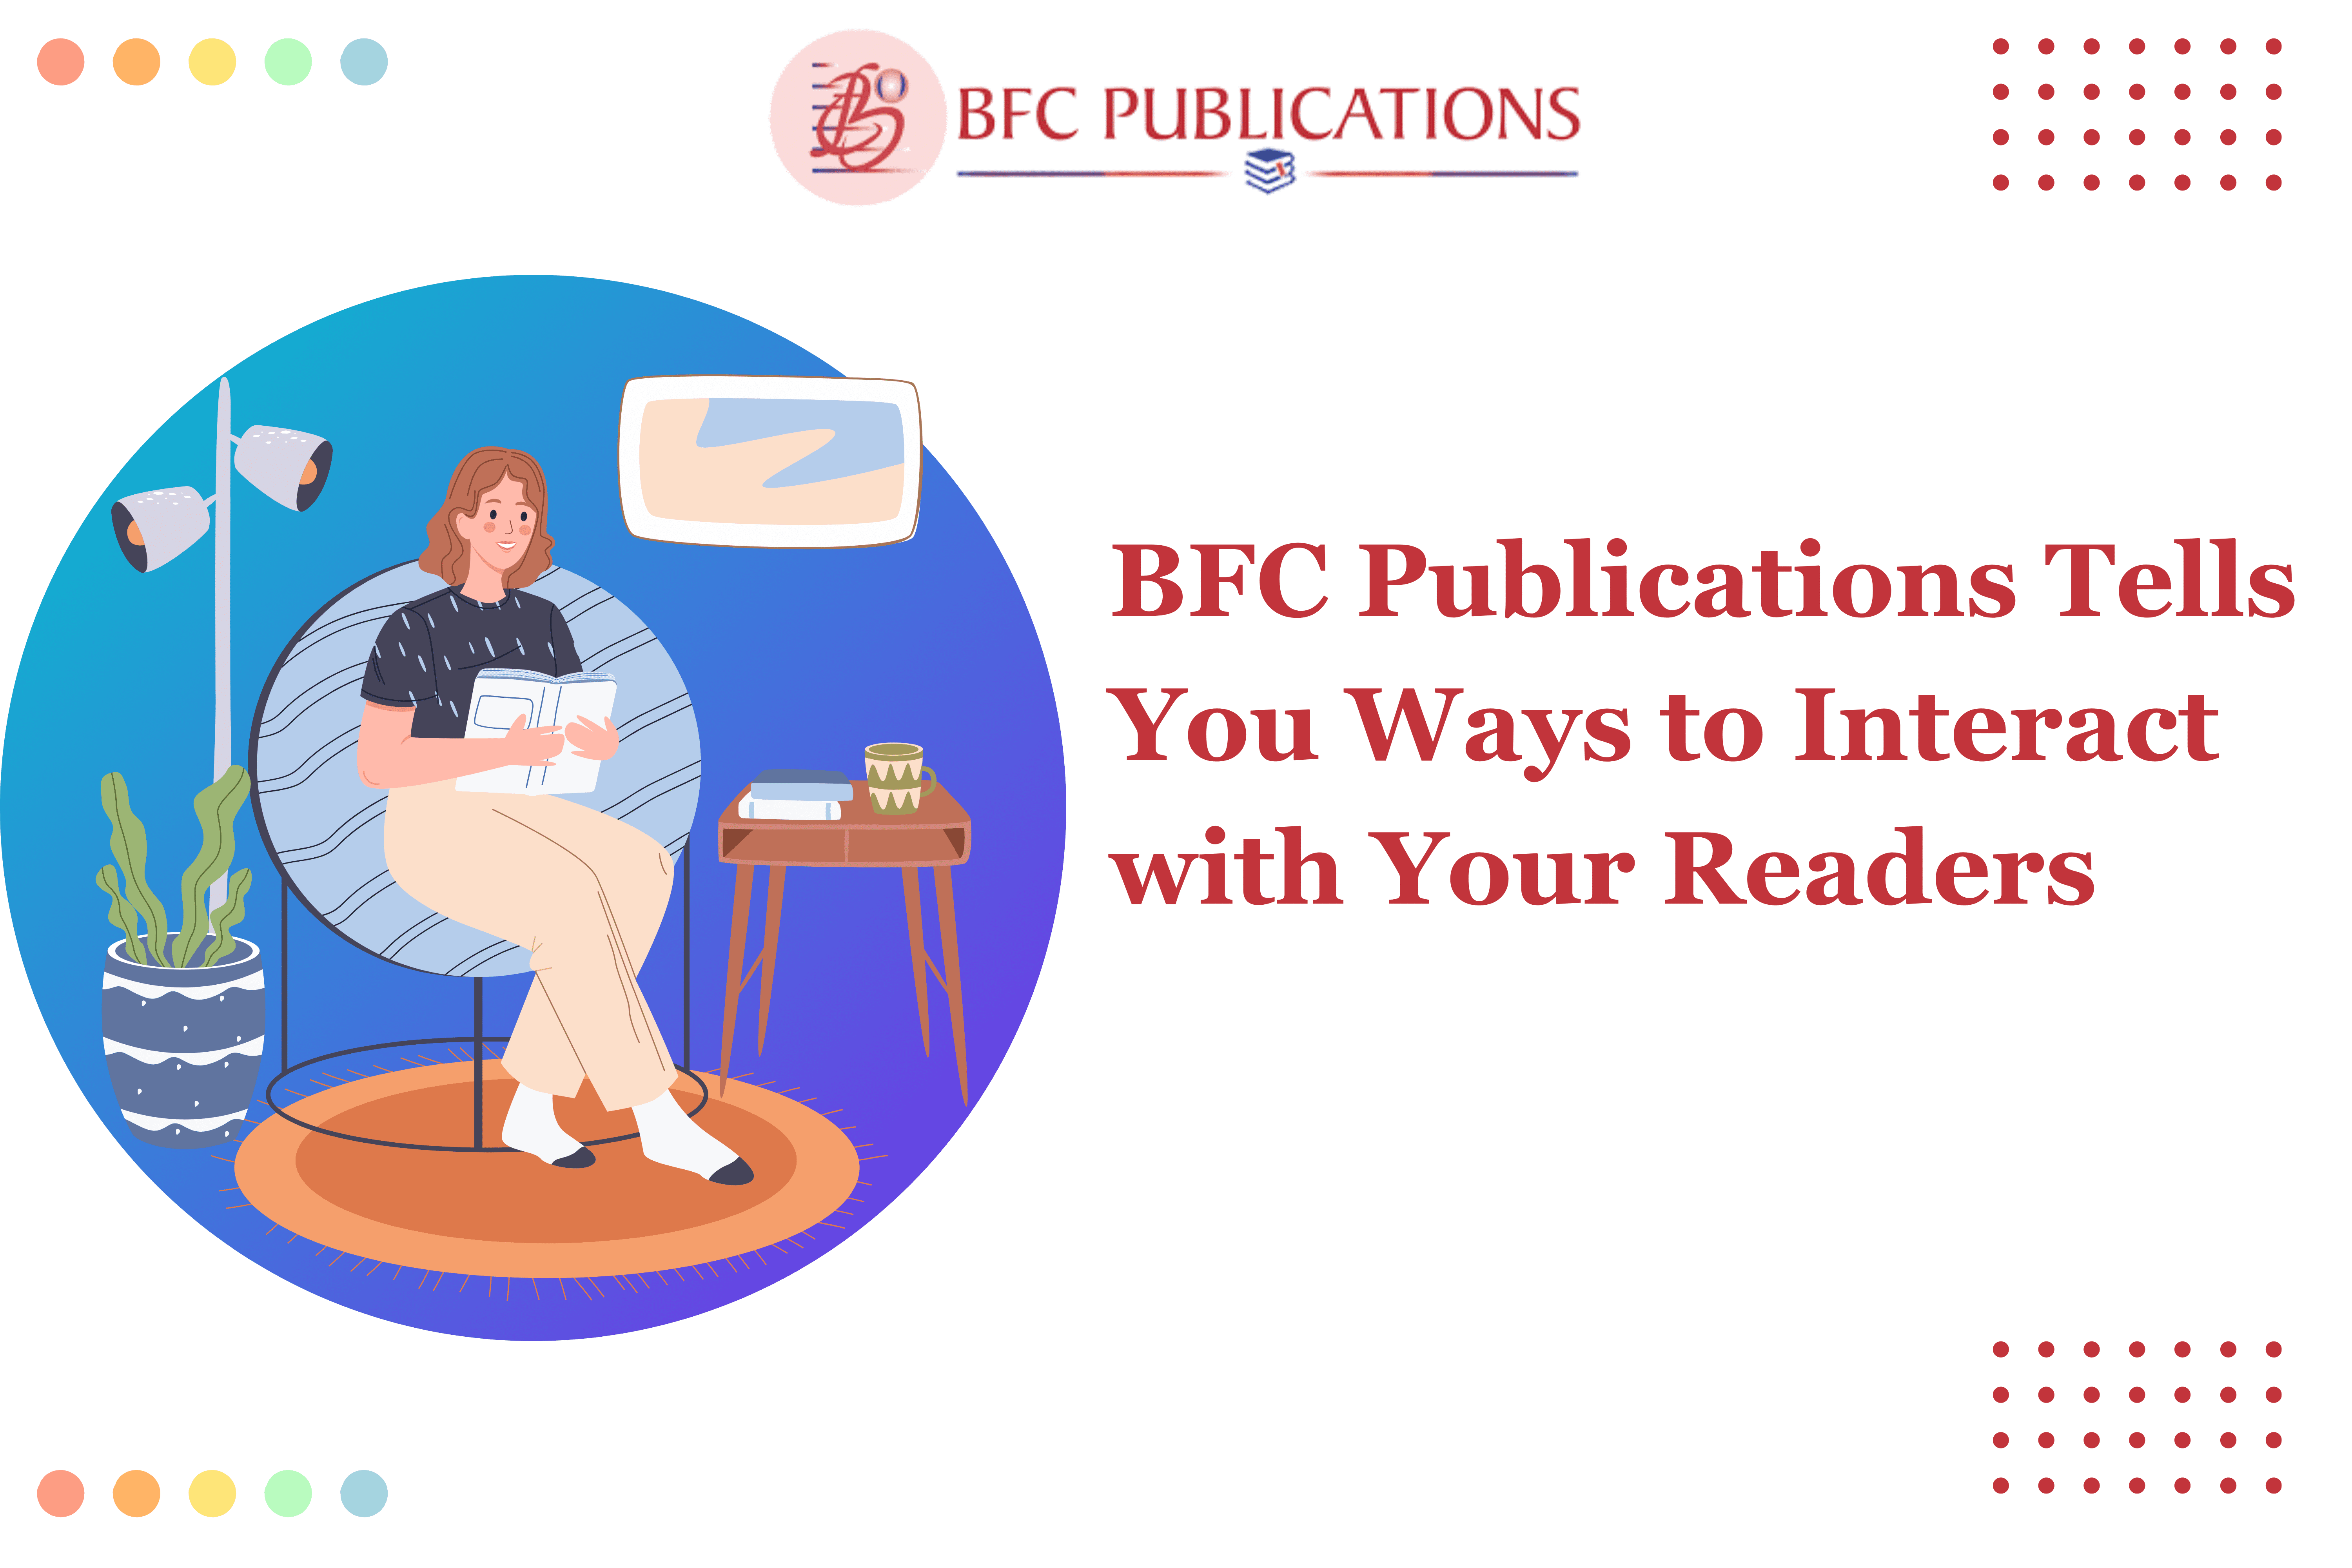 BFC Publications Tells You Ways to Interact with Your-Readers